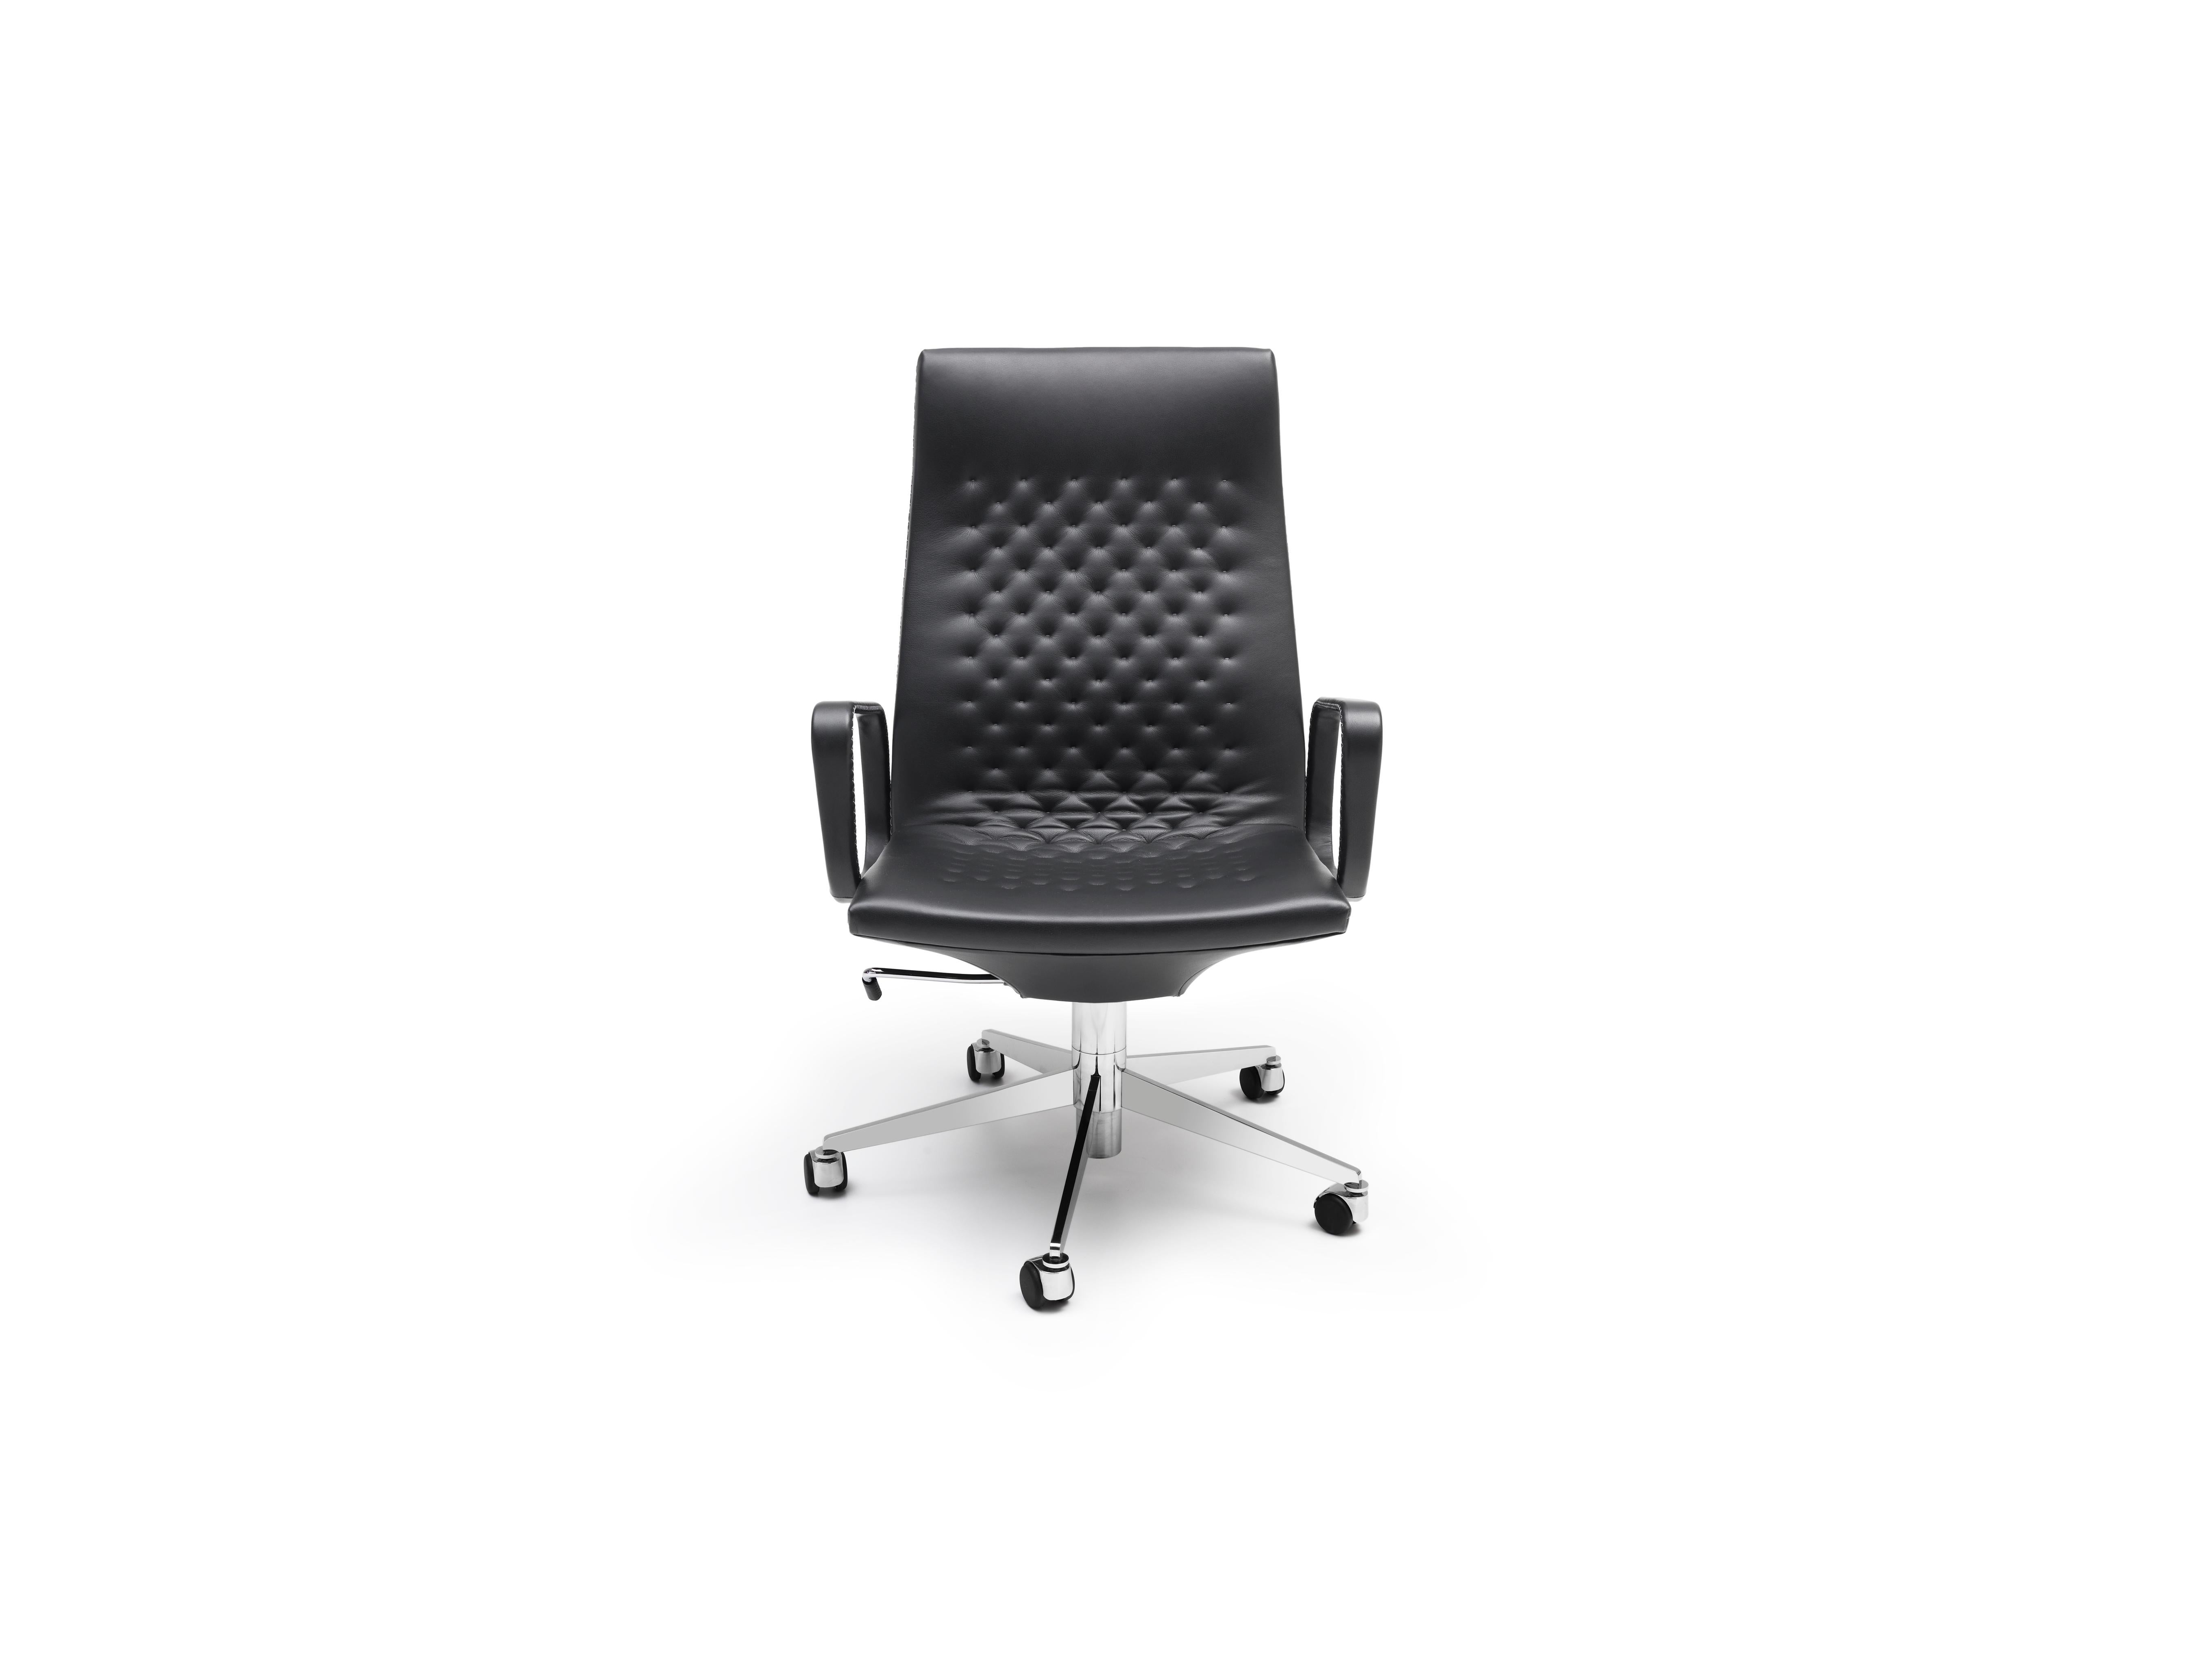 DS-1051 office chair by De Sede
Dimensions: D 62 x W 82 x H 121 cm
Materials: chrome-plated, leather

Prices may change according to the chosen materials and size. 

An all-rounder for the boss in us

DS-1051 is available in a wide variety